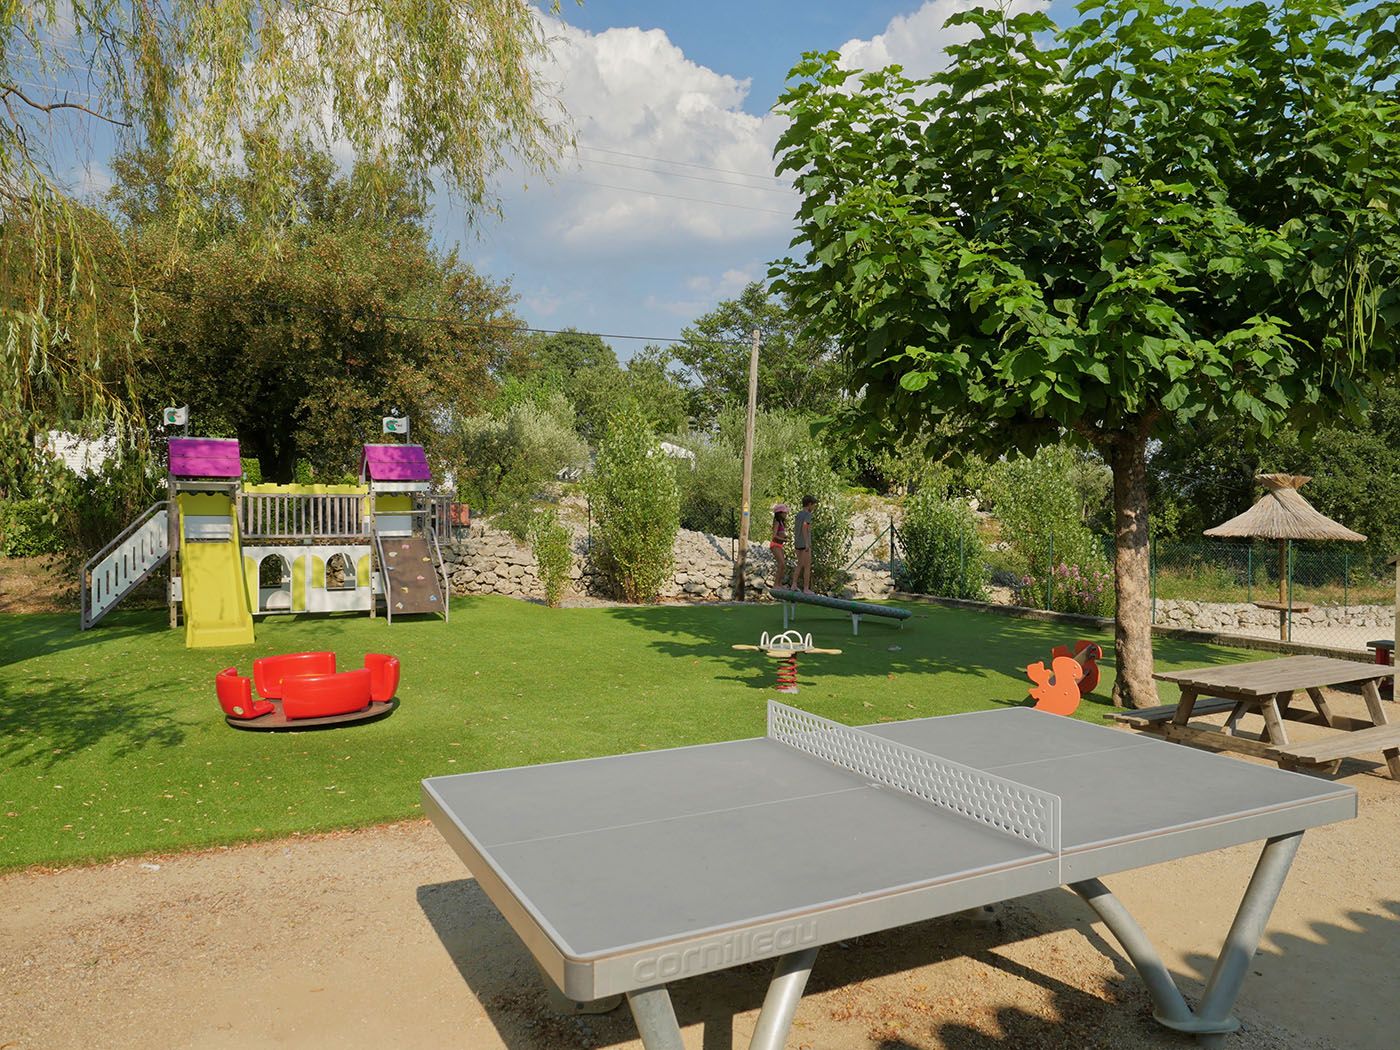 Camping Le Mas de Chavetourte - Table tennis and Playground